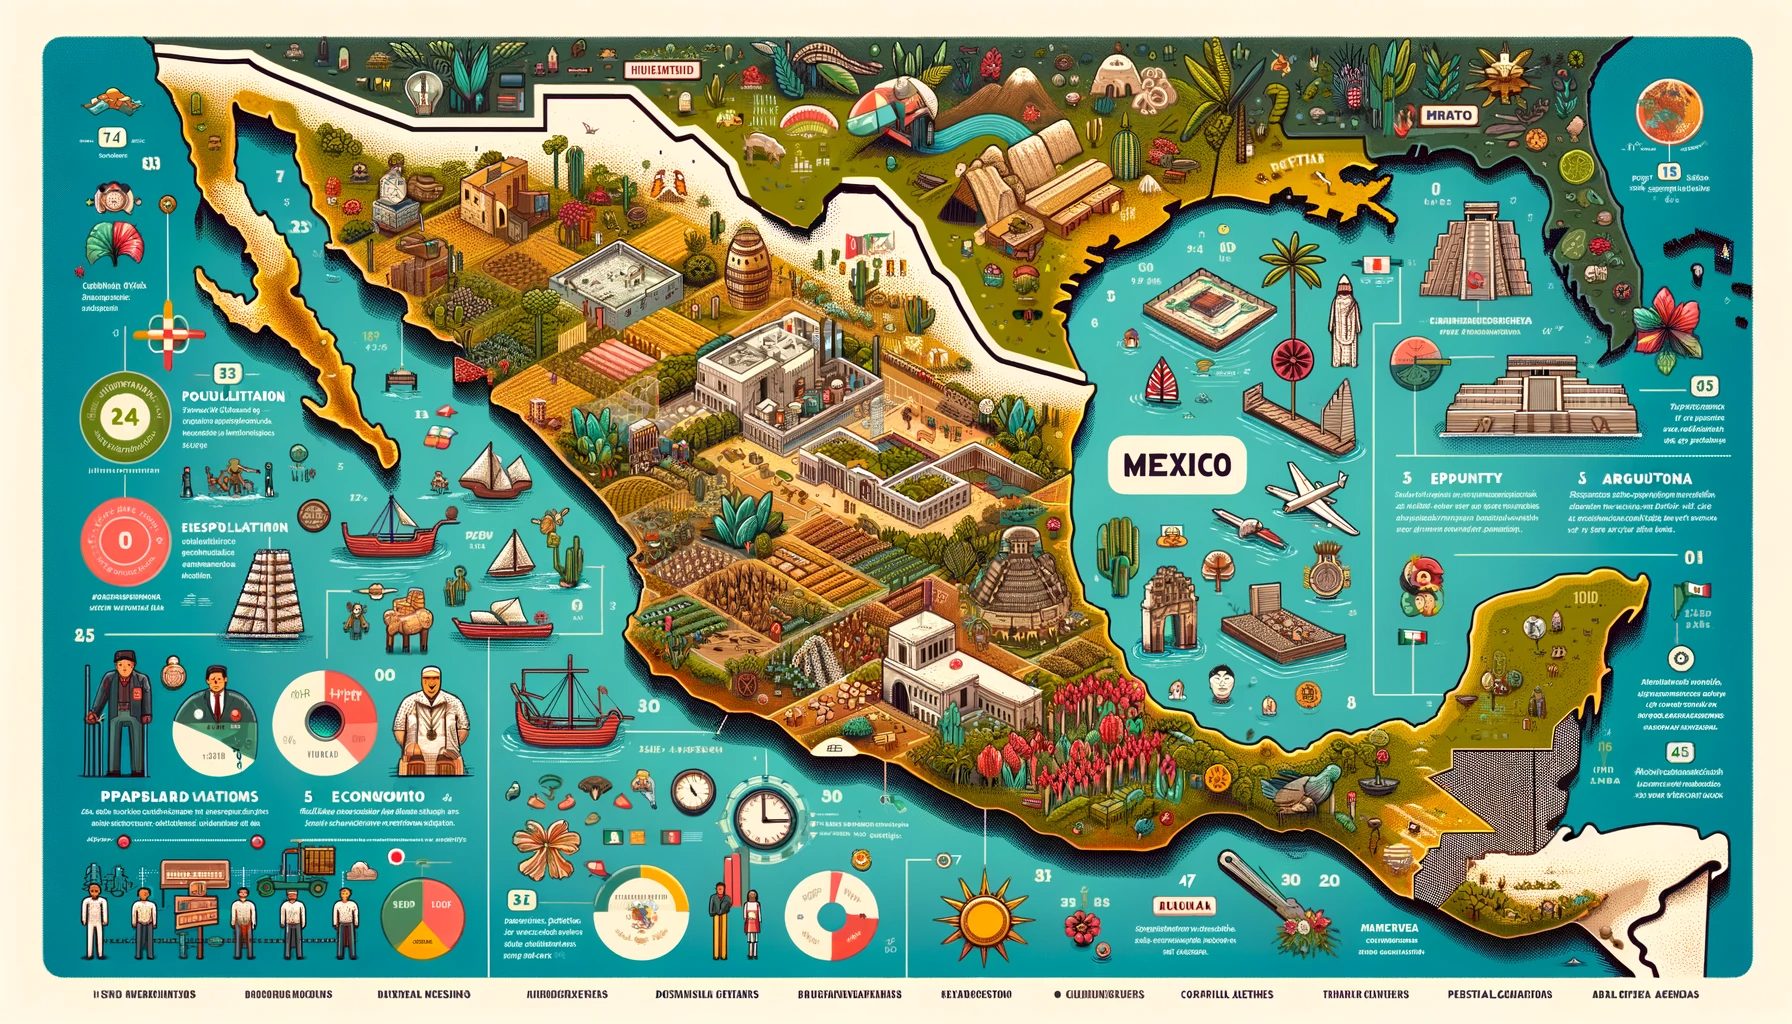 Illustrated cultural and historical map of Mexico.